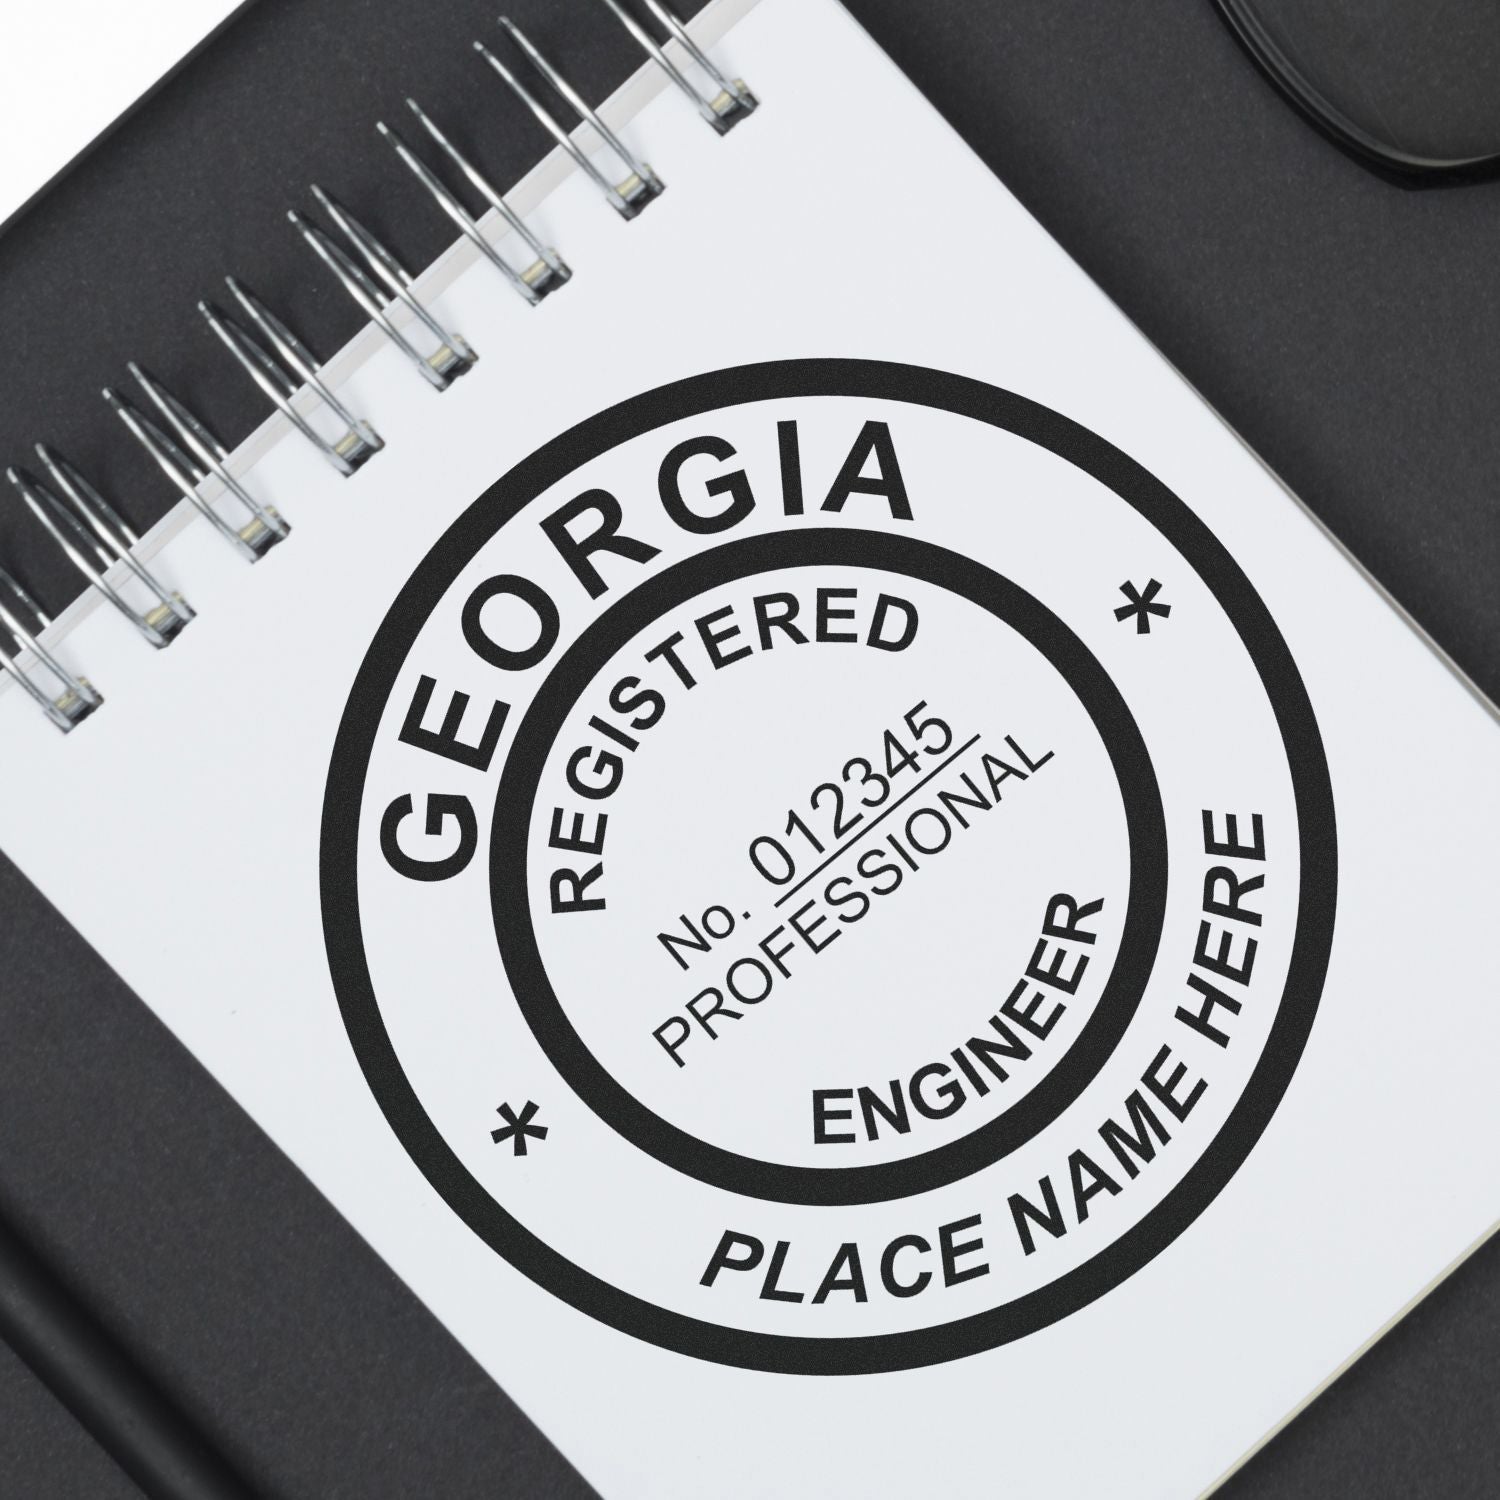 Georgia Engineering Seal Requirements Exposed: The Key to Legitimacy Feature Image